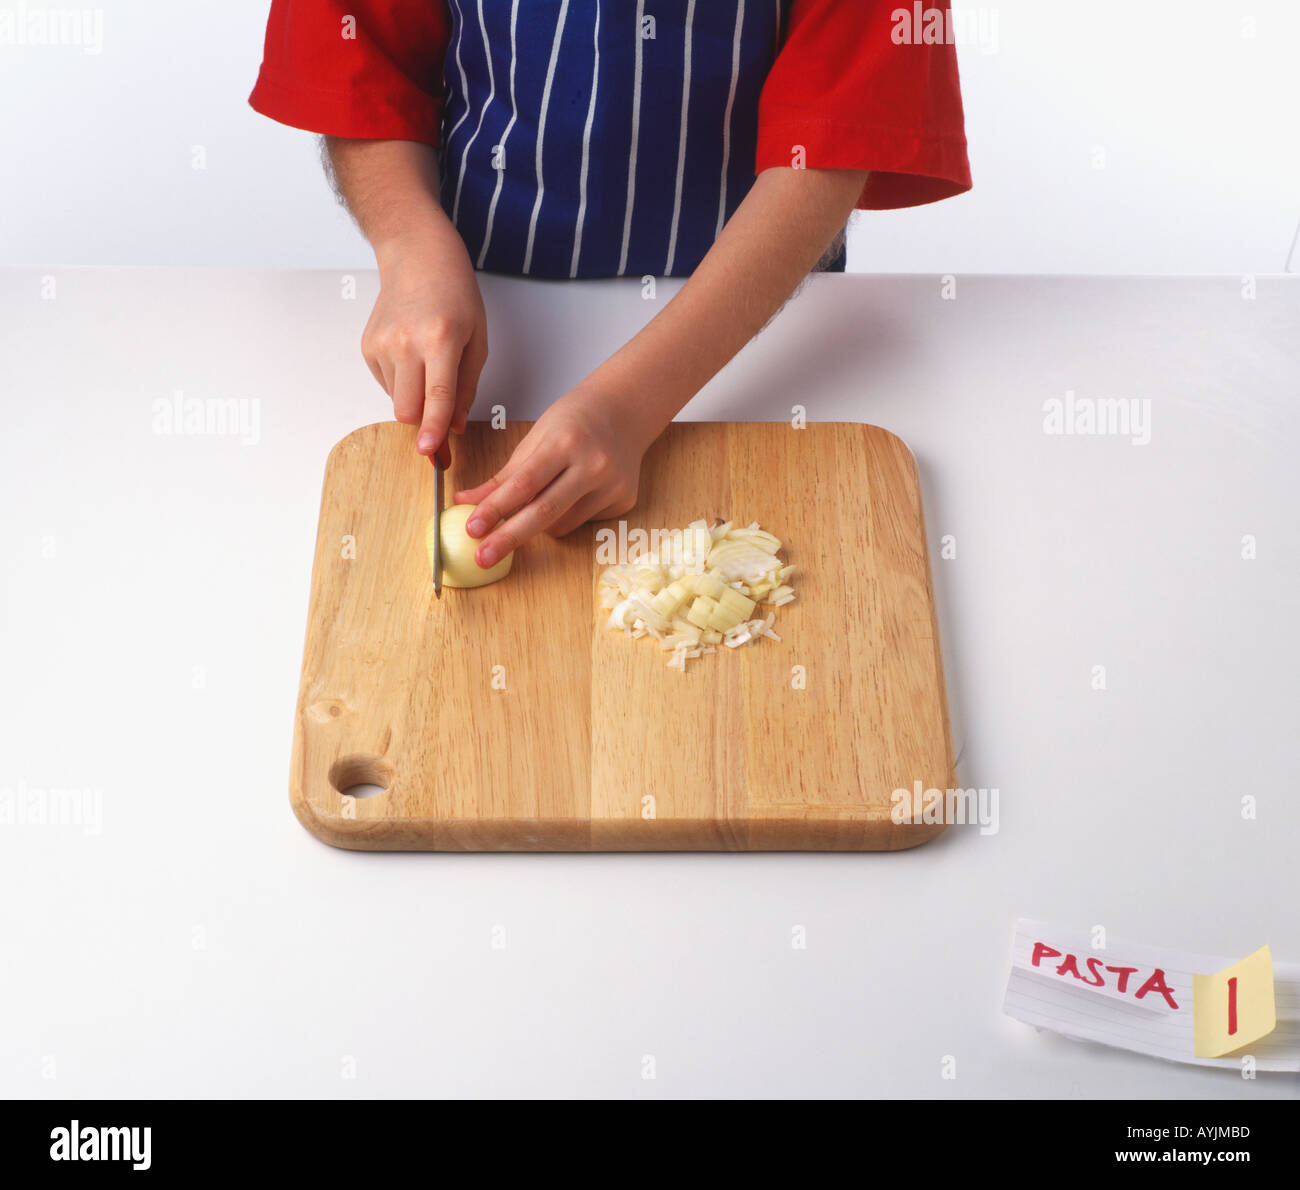 Chopping onion finely on a wooden choppingboard Stock Photo